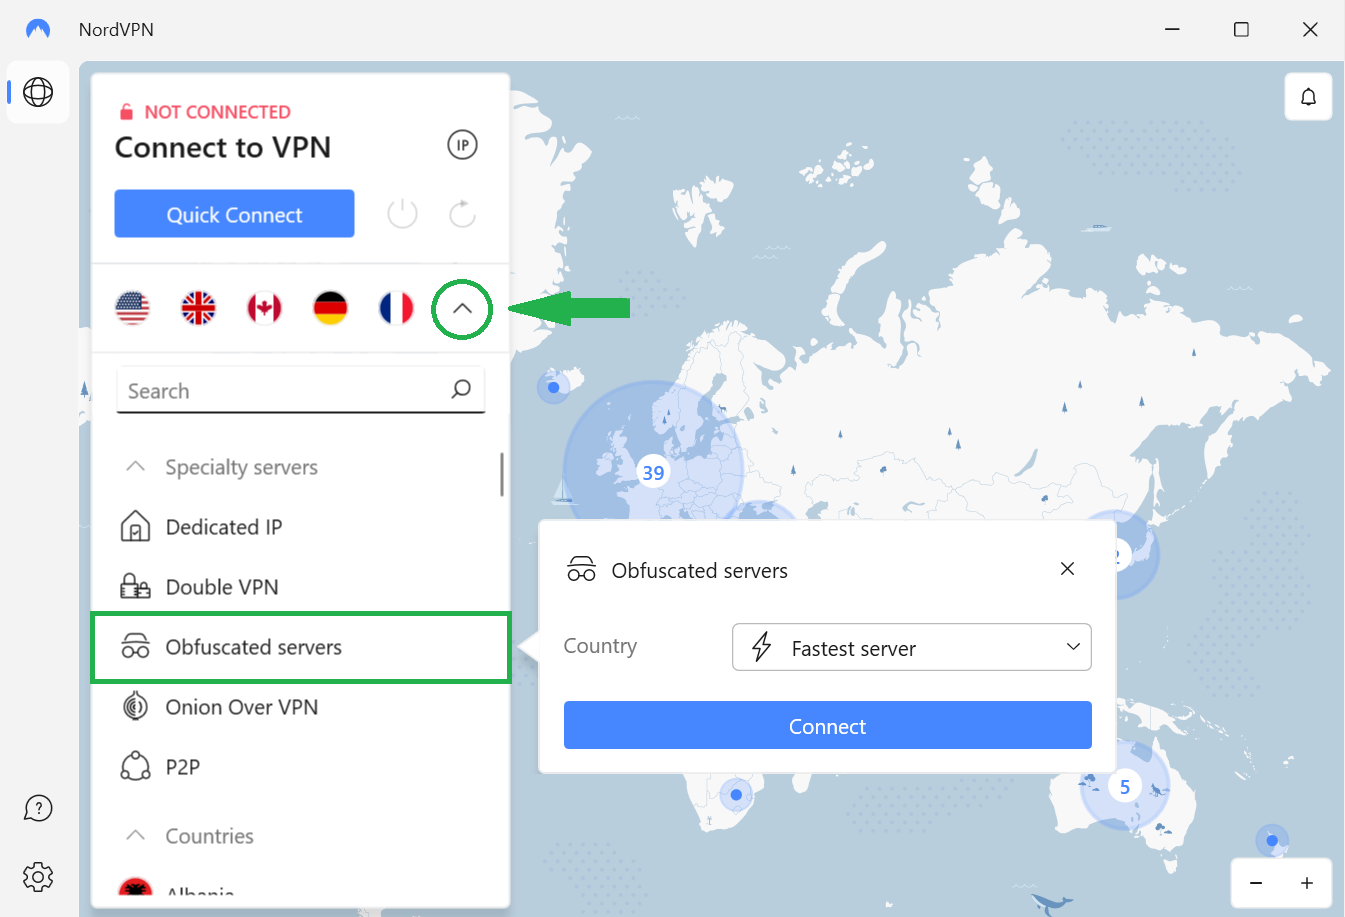 NordVPN's Obfuscated Servers settings